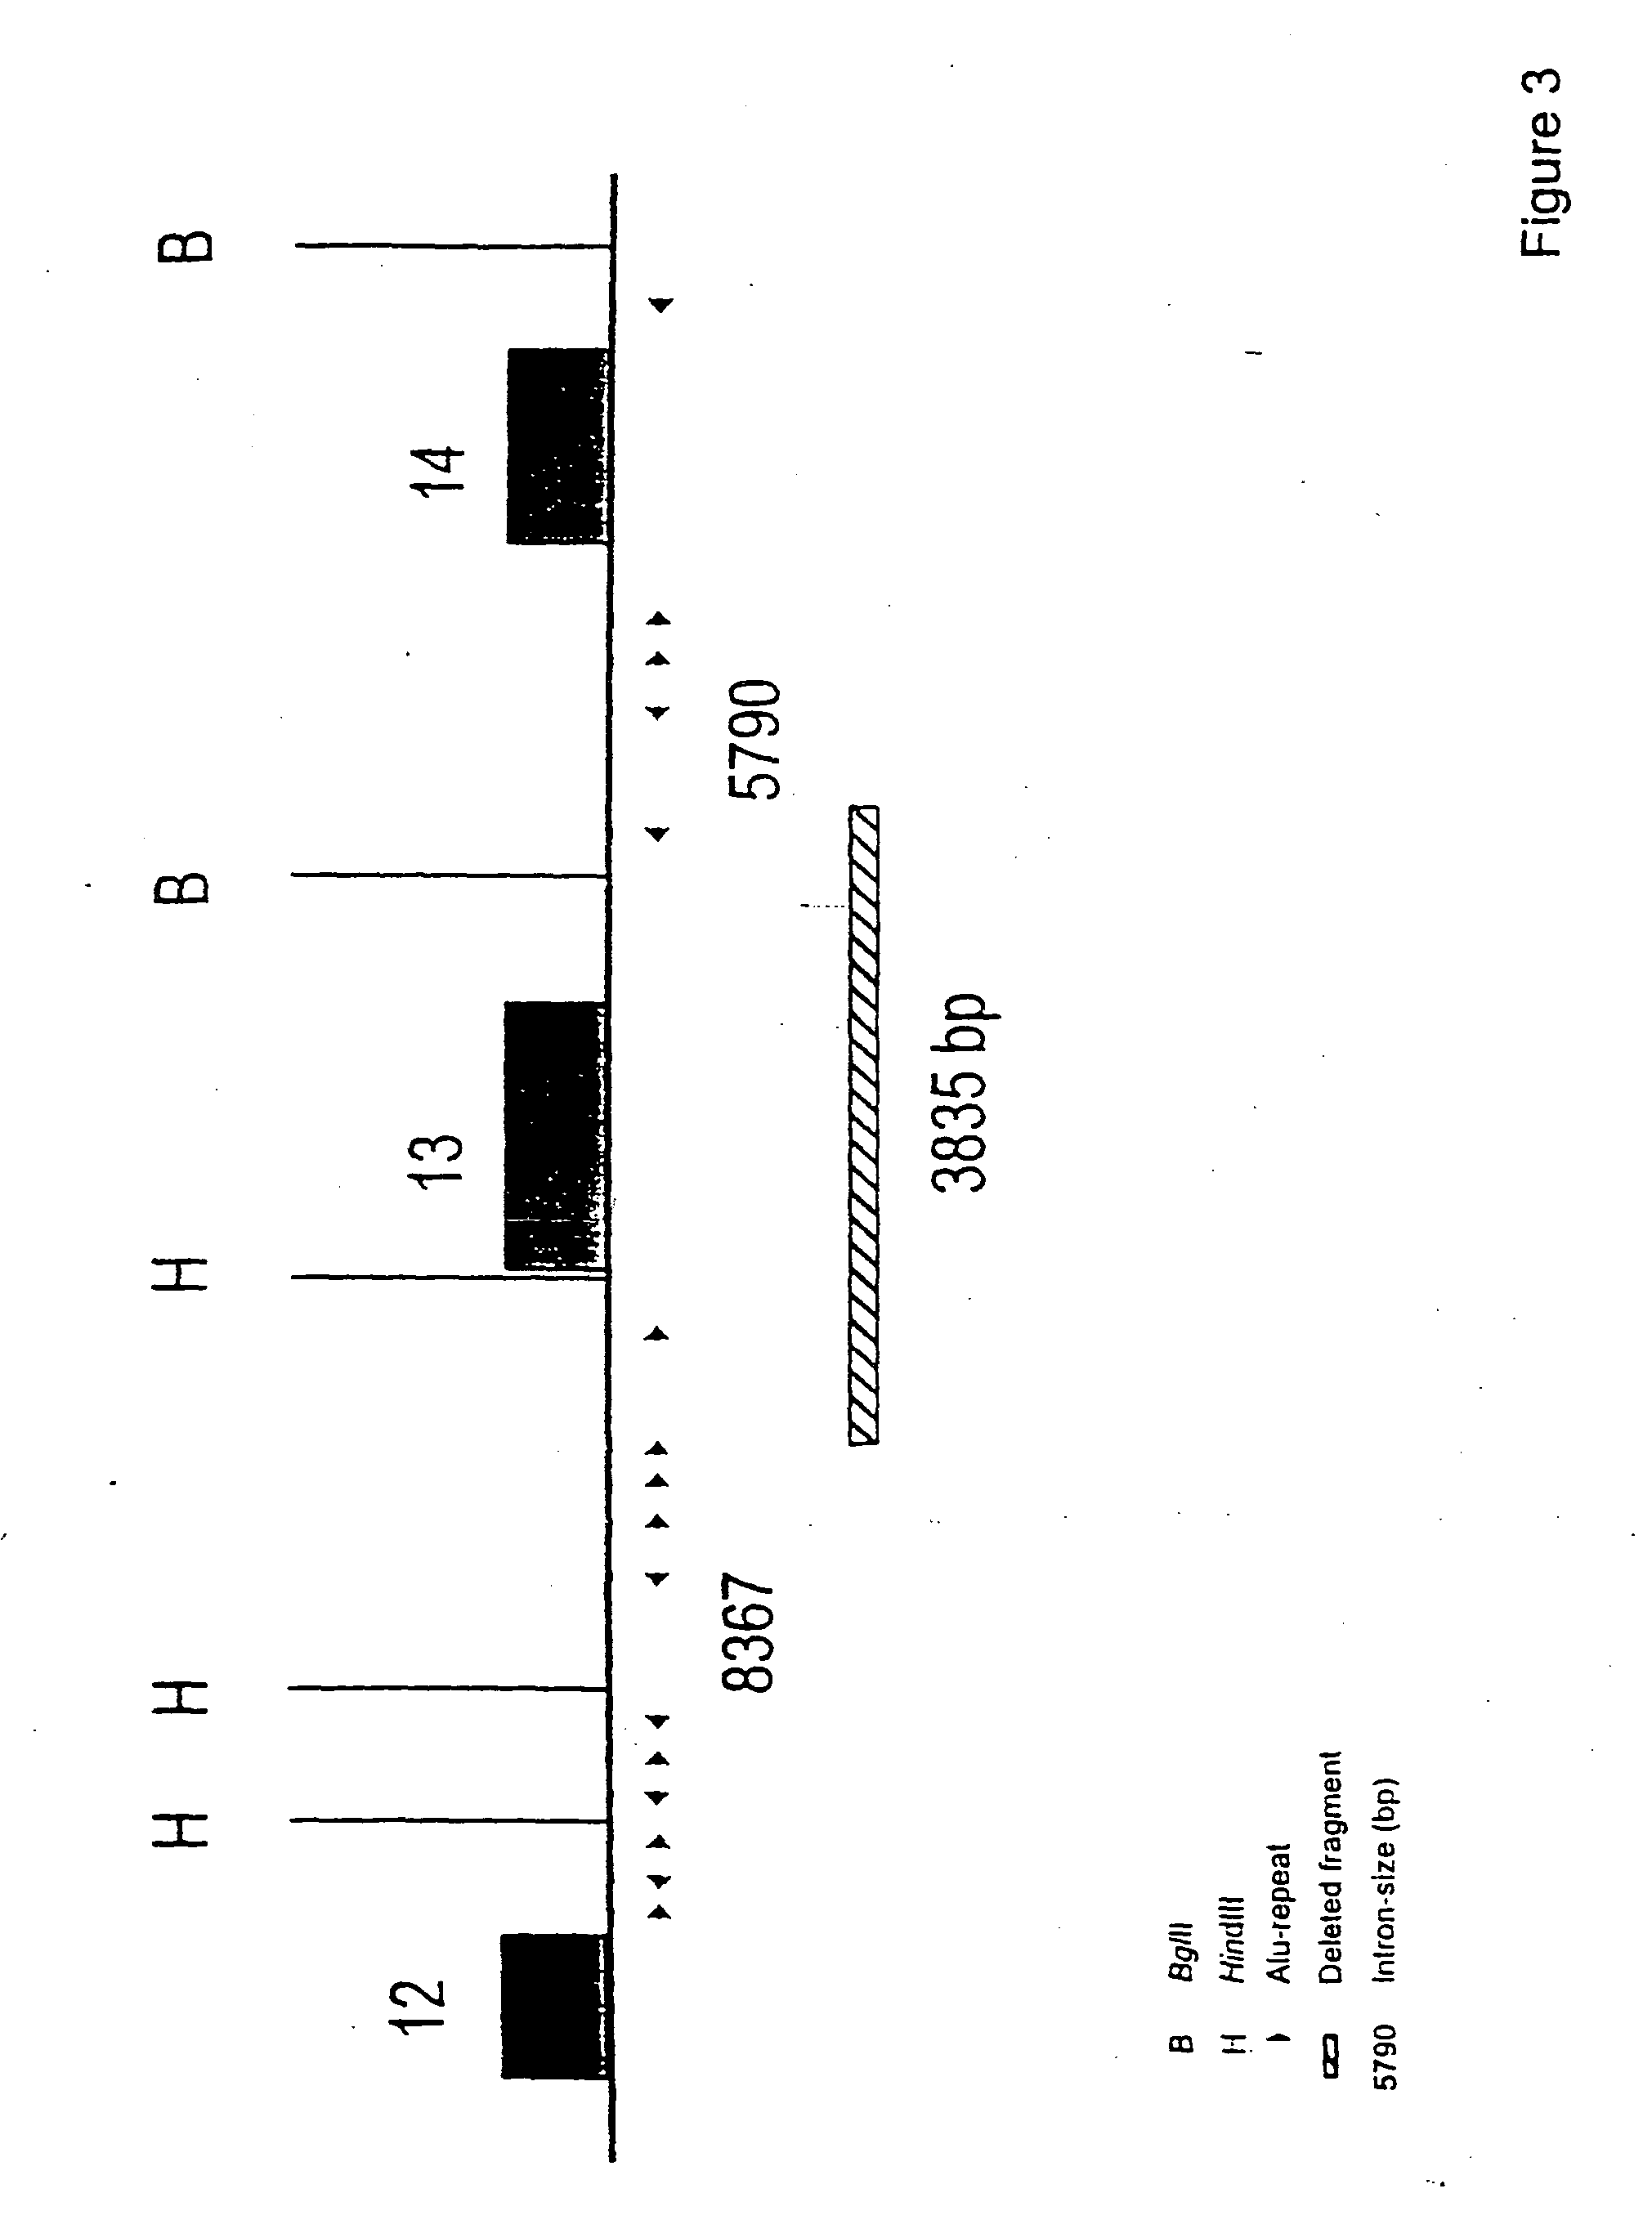 Diagnostic test kit for determining a predisposition for breast and ovarian cancer, materials and methods for such determination